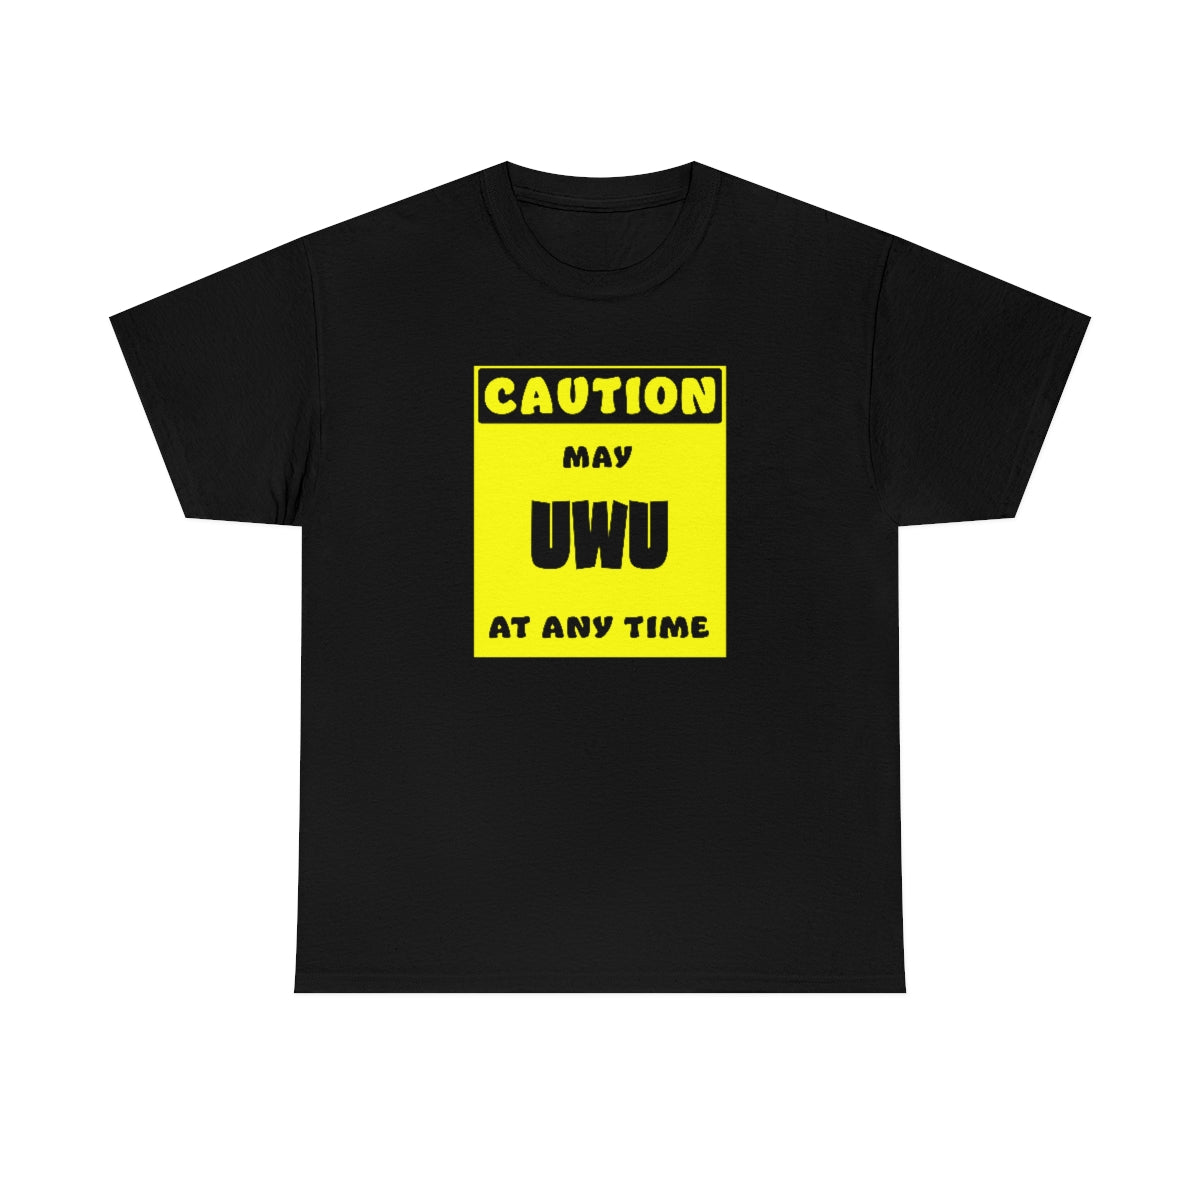 CAUTION! May UWU at any time! - T-Shirt T-Shirt AFLT-Whootorca Black S 